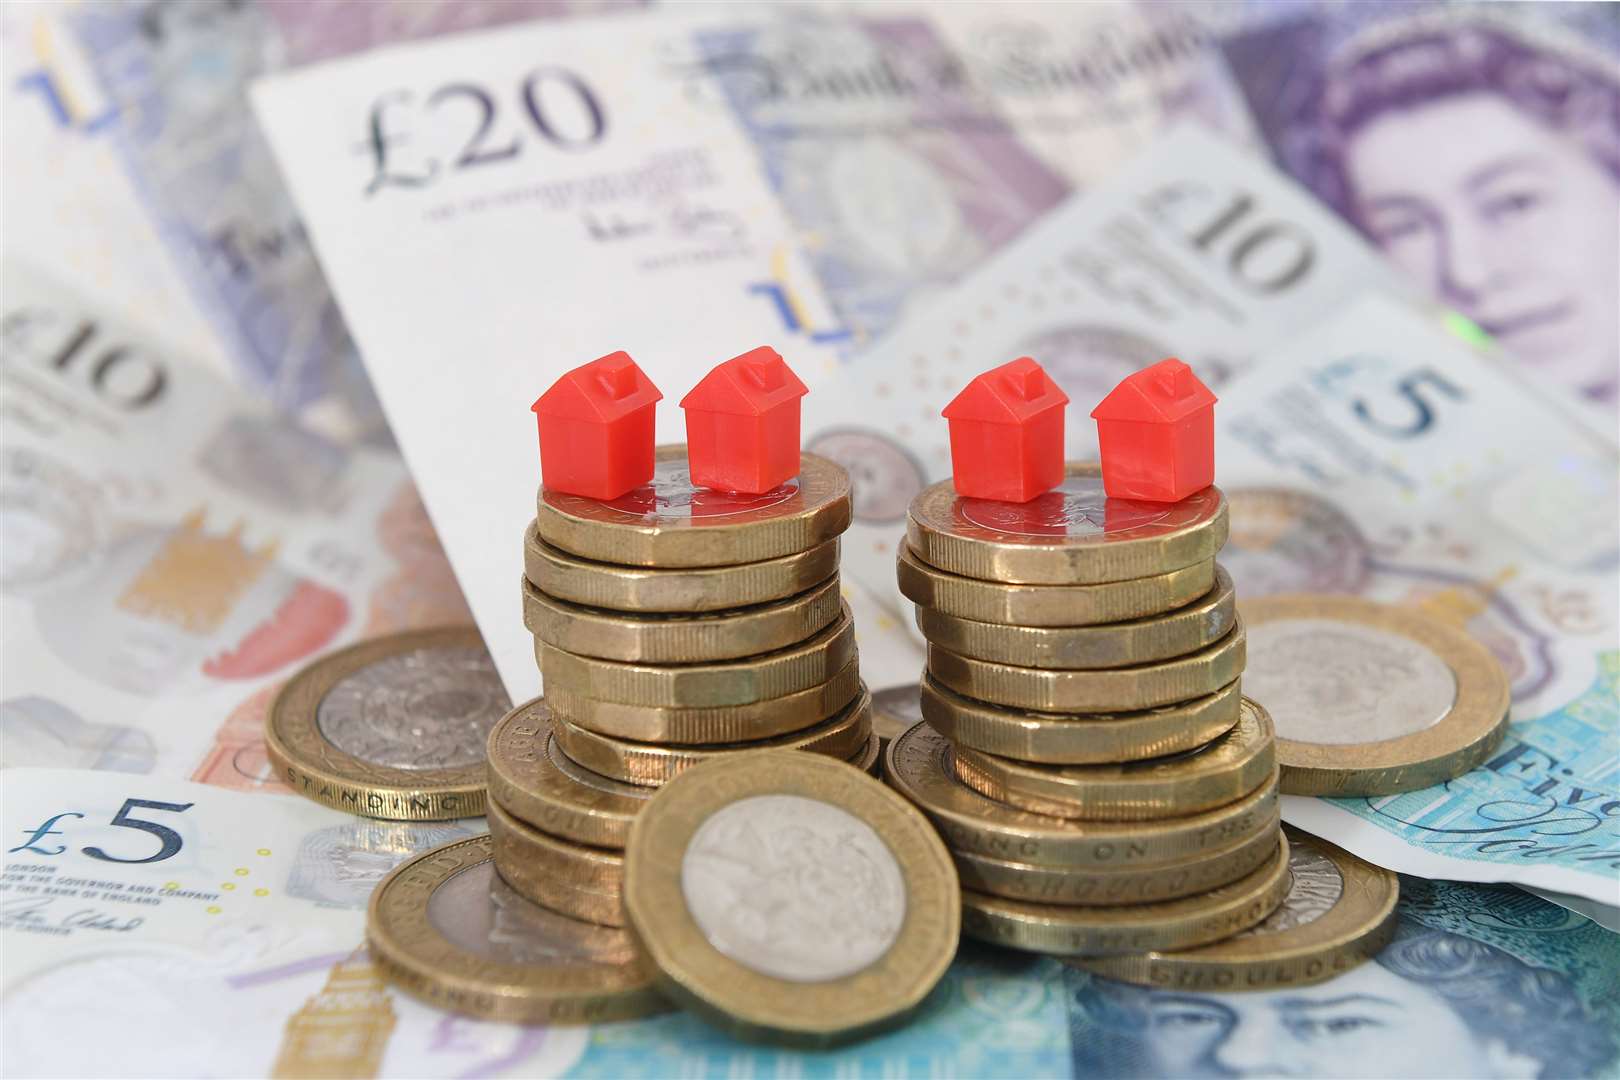 Most areas average house prices are 10 times the average salary